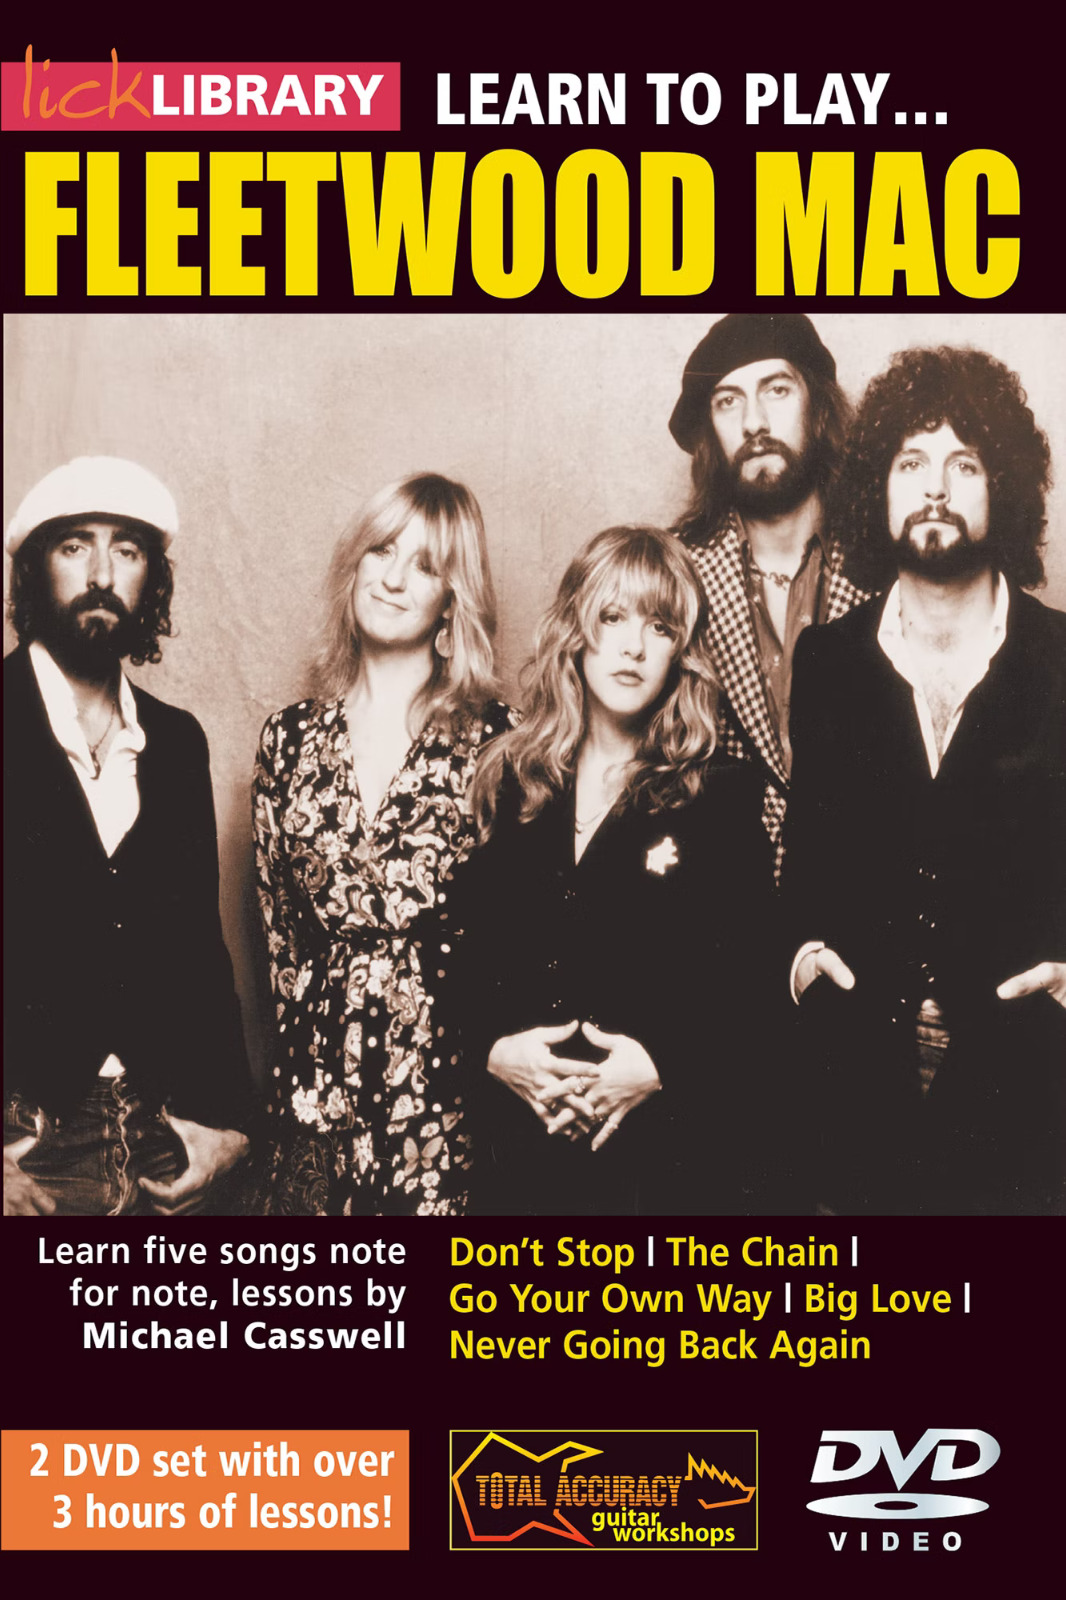 Lick Library LEARN TO PLAY FLEETWOOD MAC Guitar Video Lessons 2 DVDs